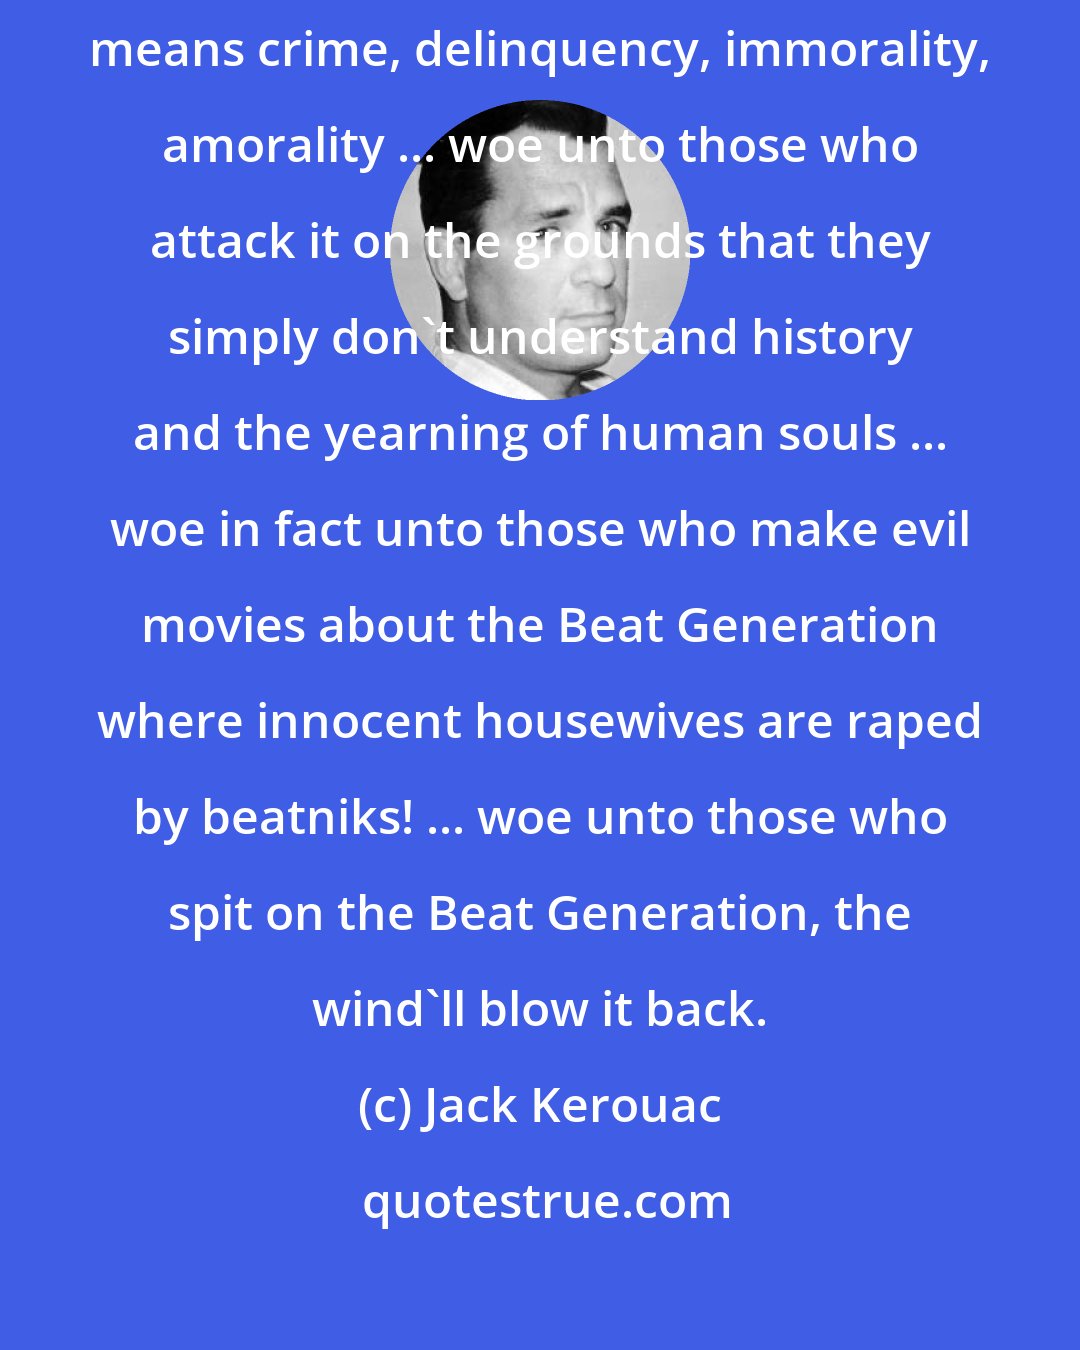 Jack Kerouac: But yet, but yet, woe, woe unto those who think that the Beat Generation means crime, delinquency, immorality, amorality ... woe unto those who attack it on the grounds that they simply don't understand history and the yearning of human souls ... woe in fact unto those who make evil movies about the Beat Generation where innocent housewives are raped by beatniks! ... woe unto those who spit on the Beat Generation, the wind'll blow it back.